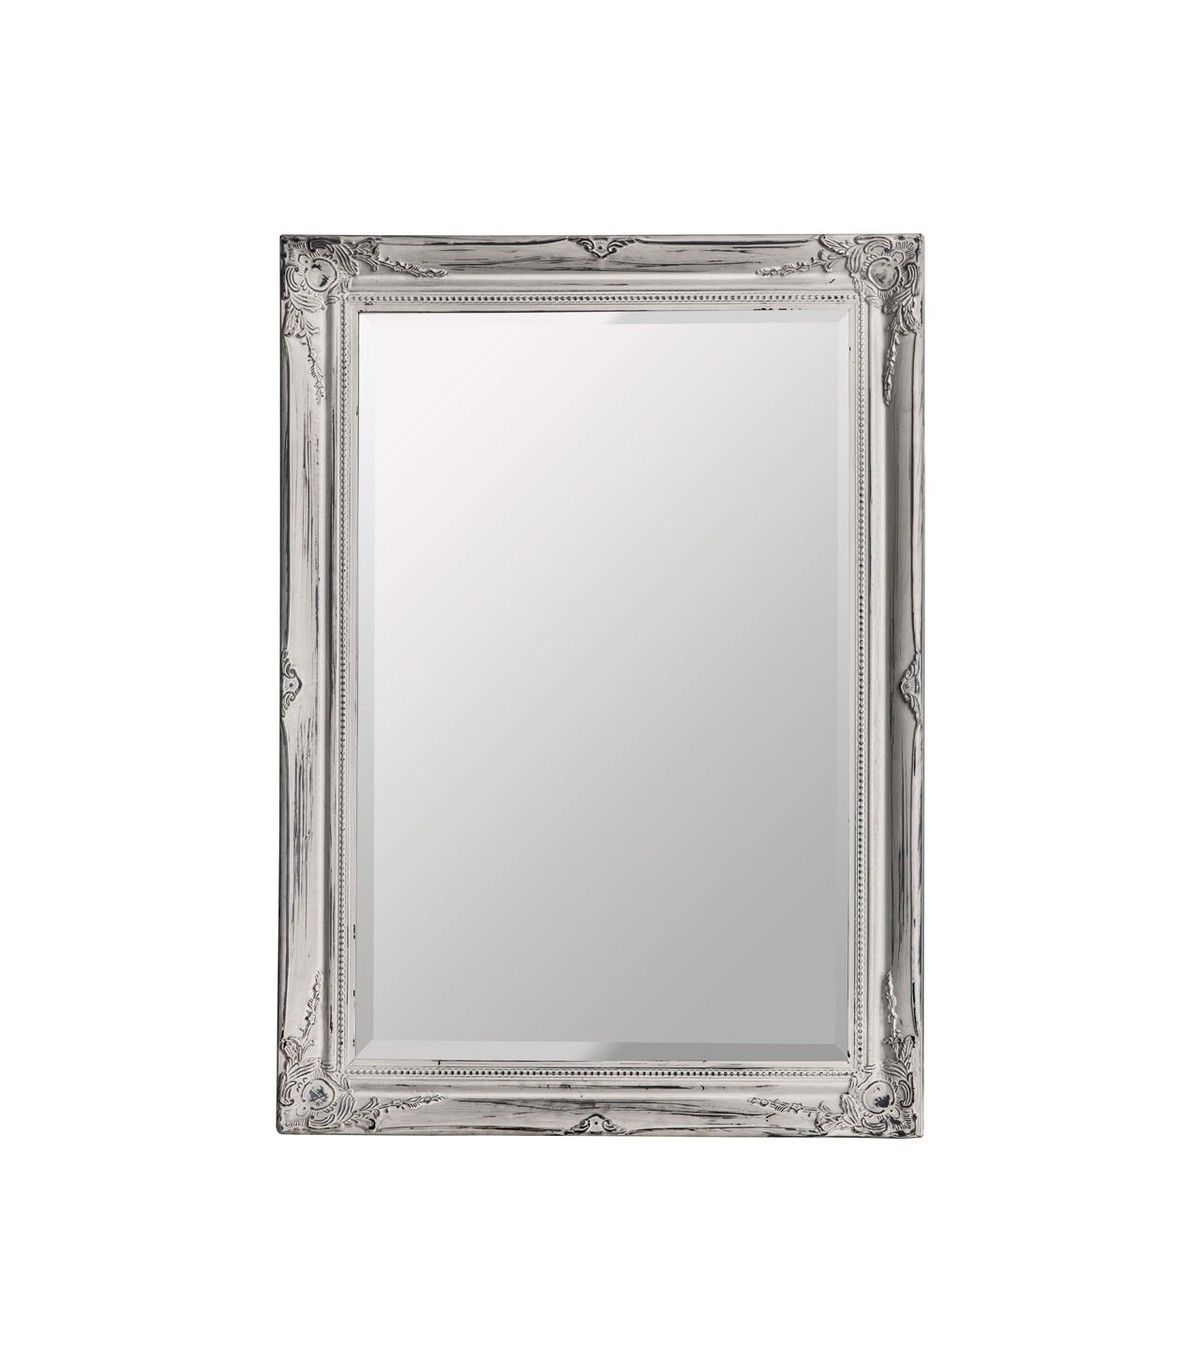 Most Popular Distressed Wall Mirrors For Distressed Wall Mirror (View 14 of 20)